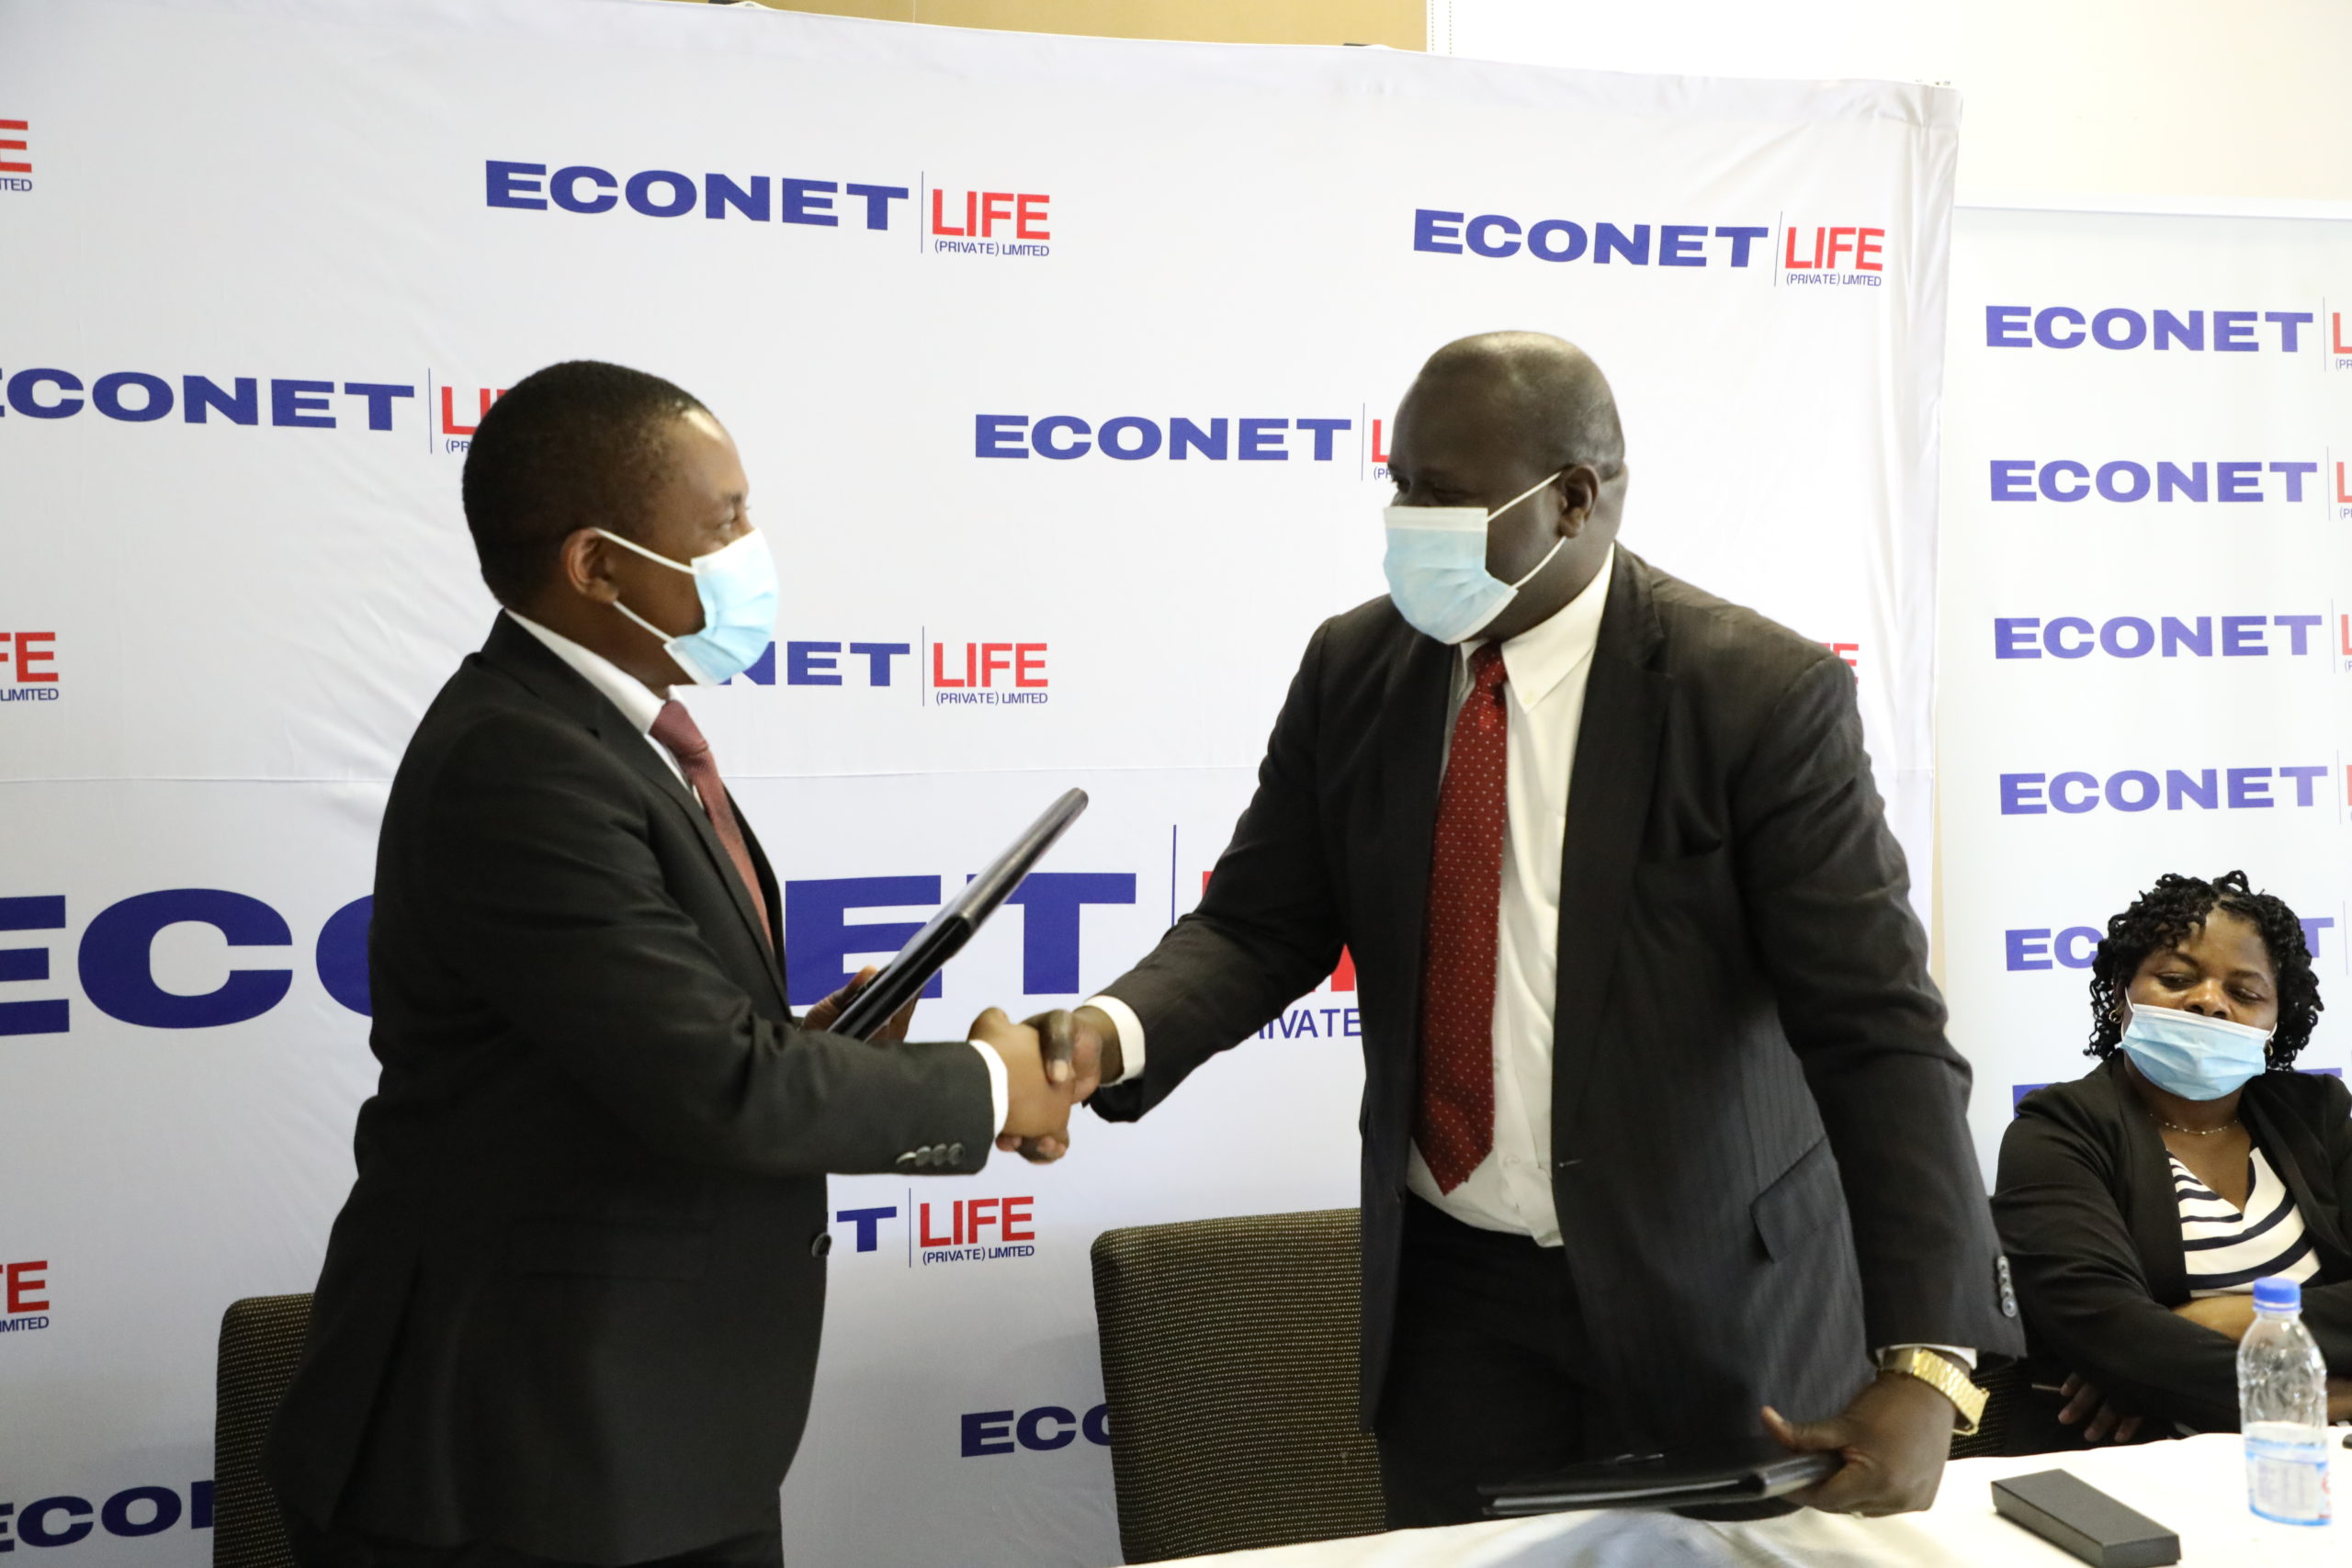 Econet Life answers church’s prayers, offers insurance services to large Christian body